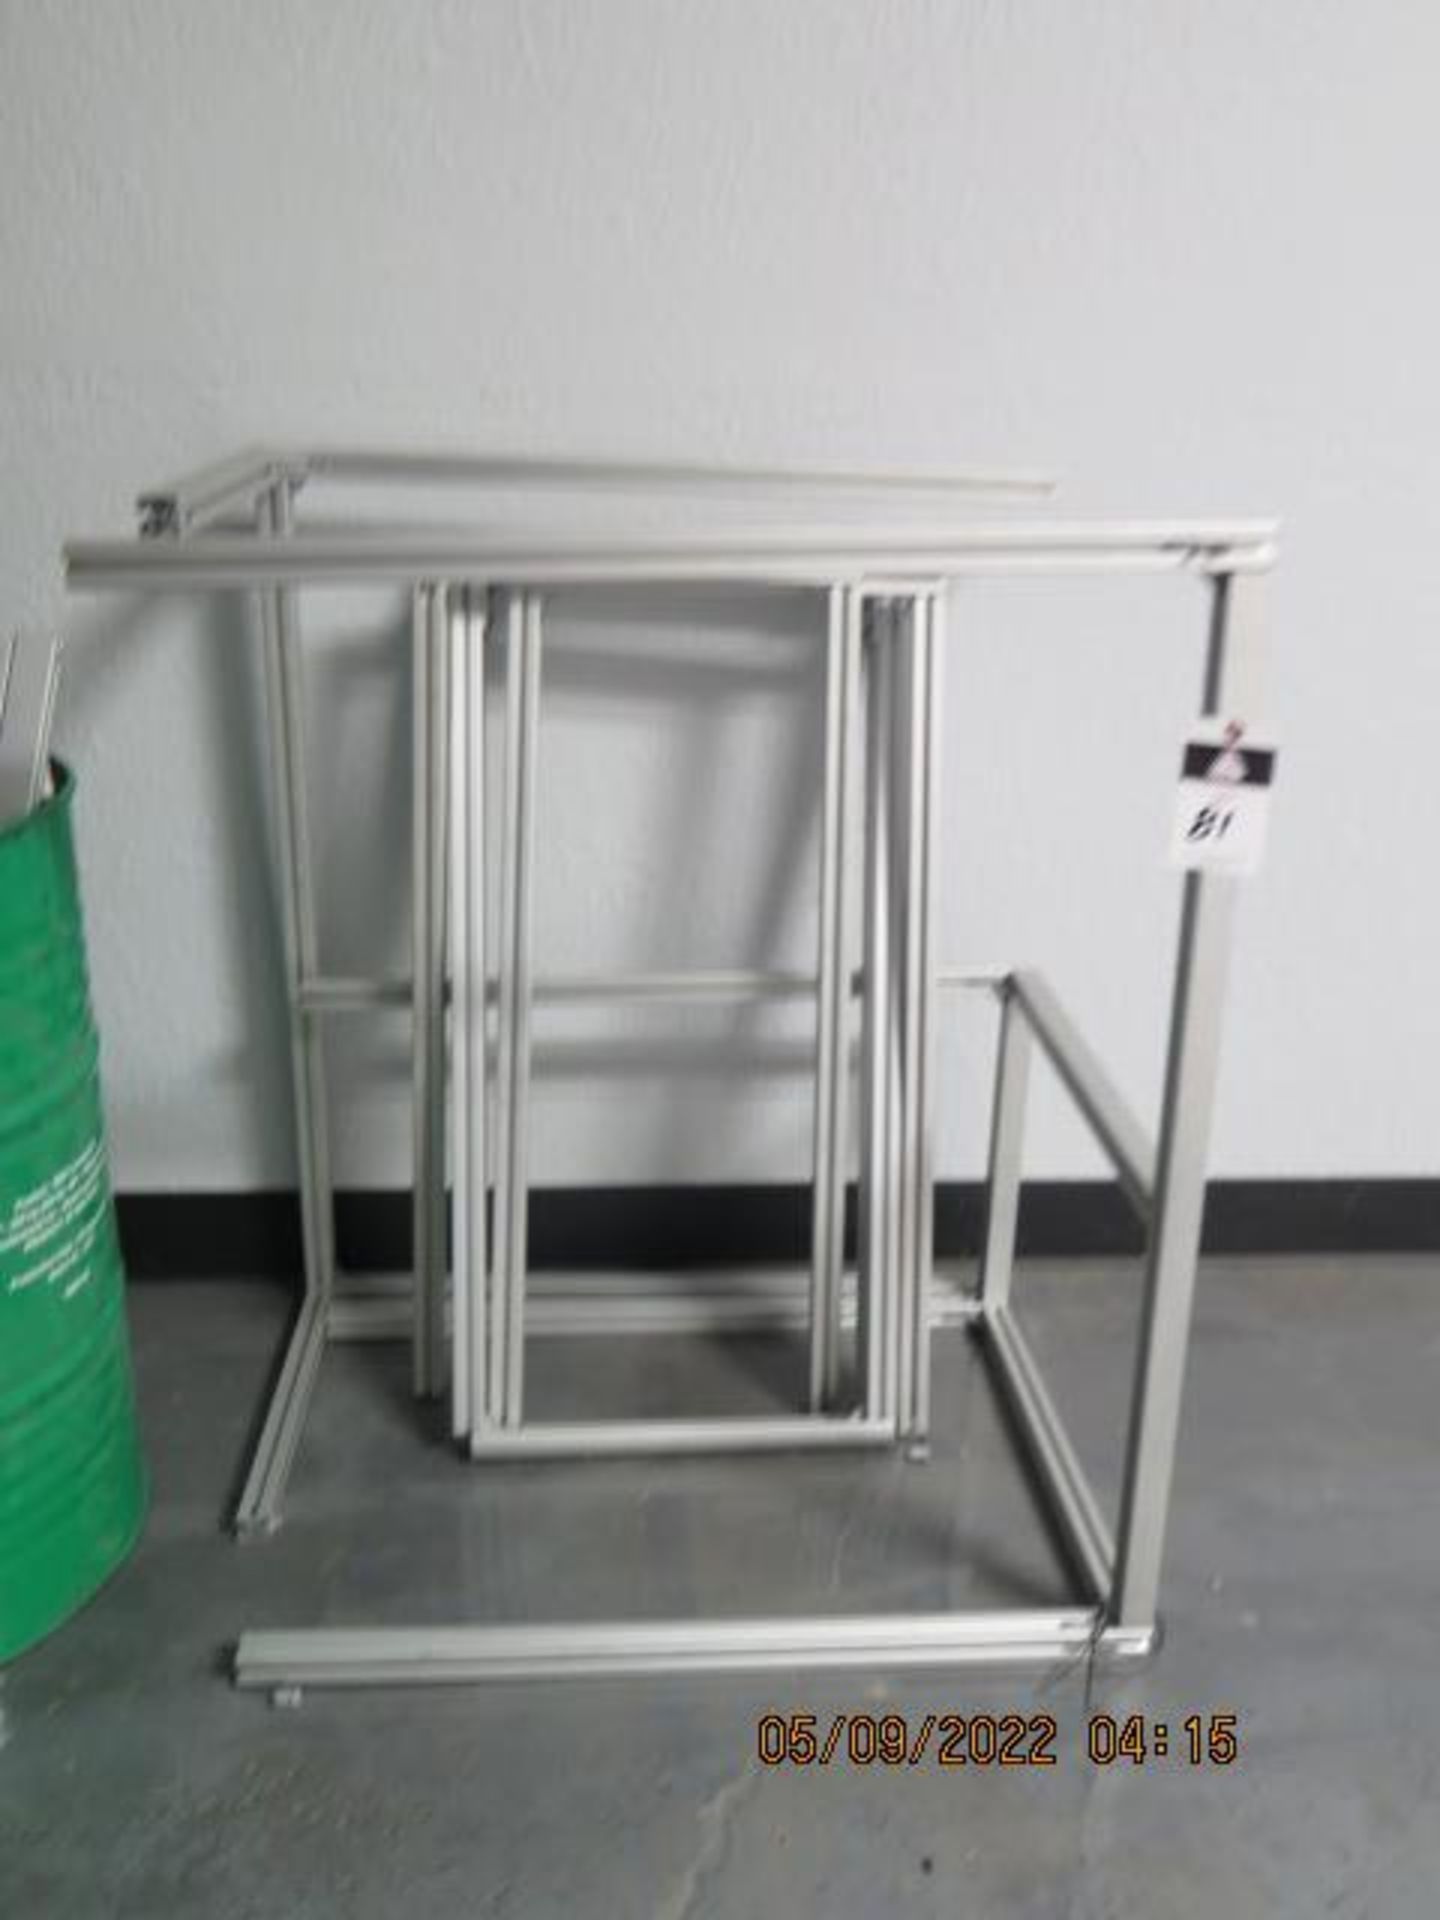 Aluminum Strut Framing (SOLD AS-IS - NO WARRANTY) - Image 2 of 7